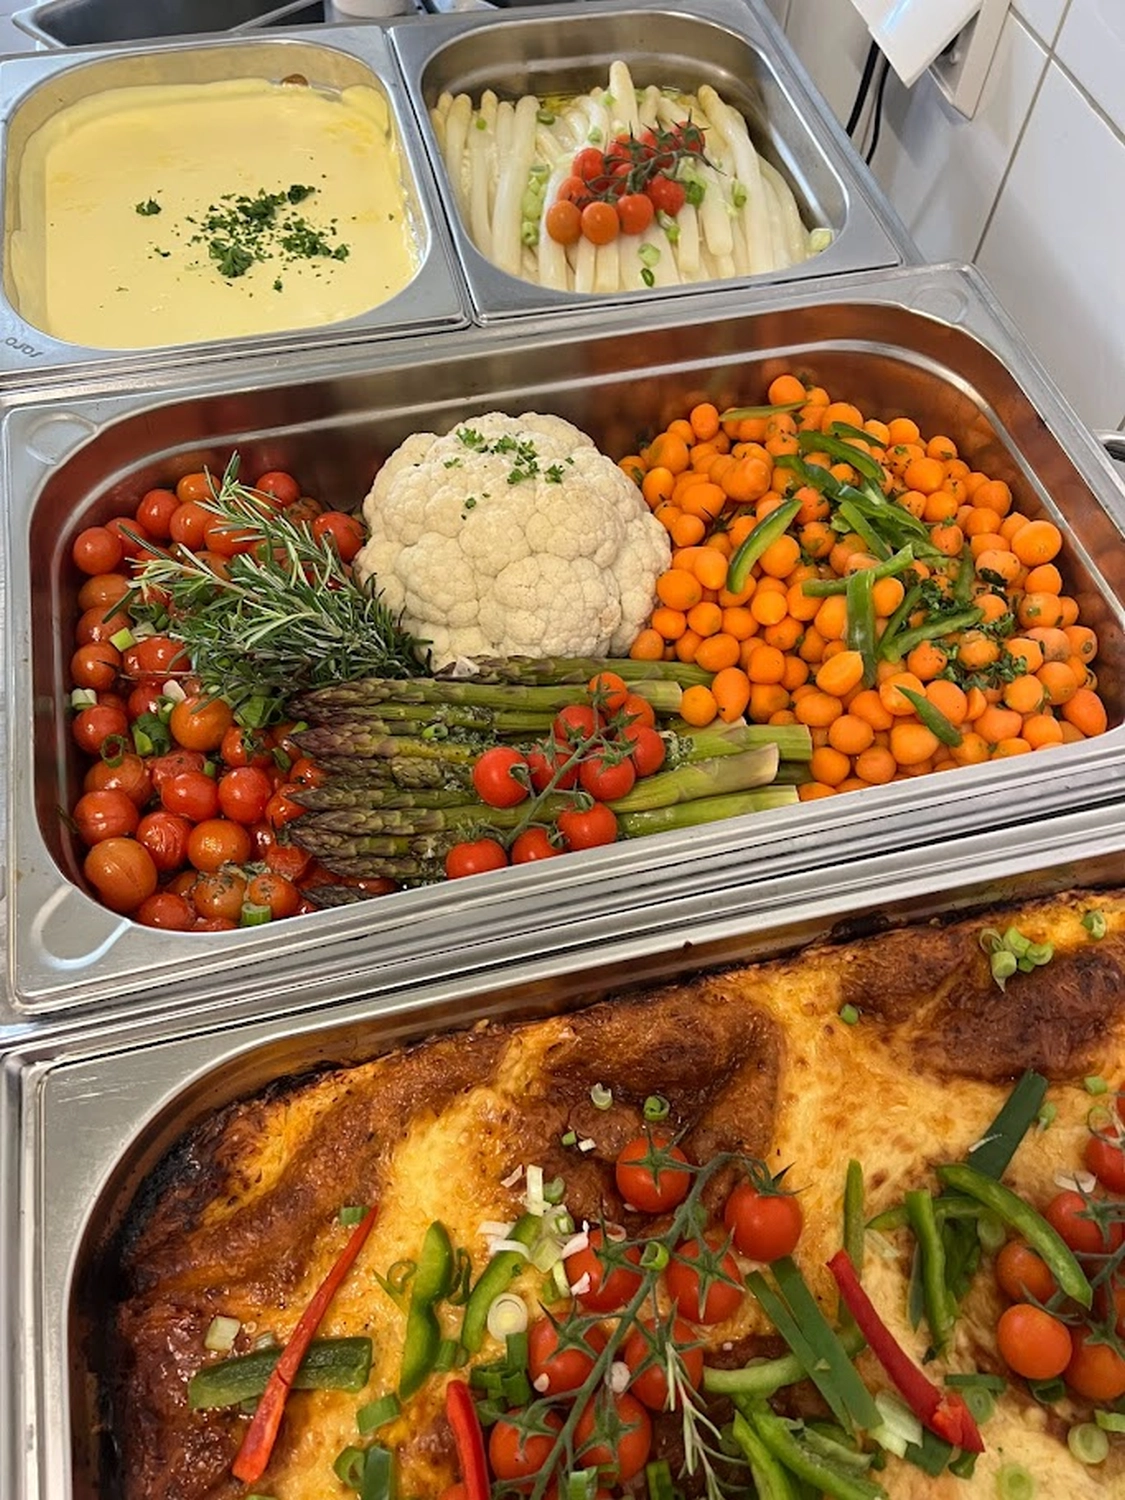 Catering-Service Schimion, Essen in Containern